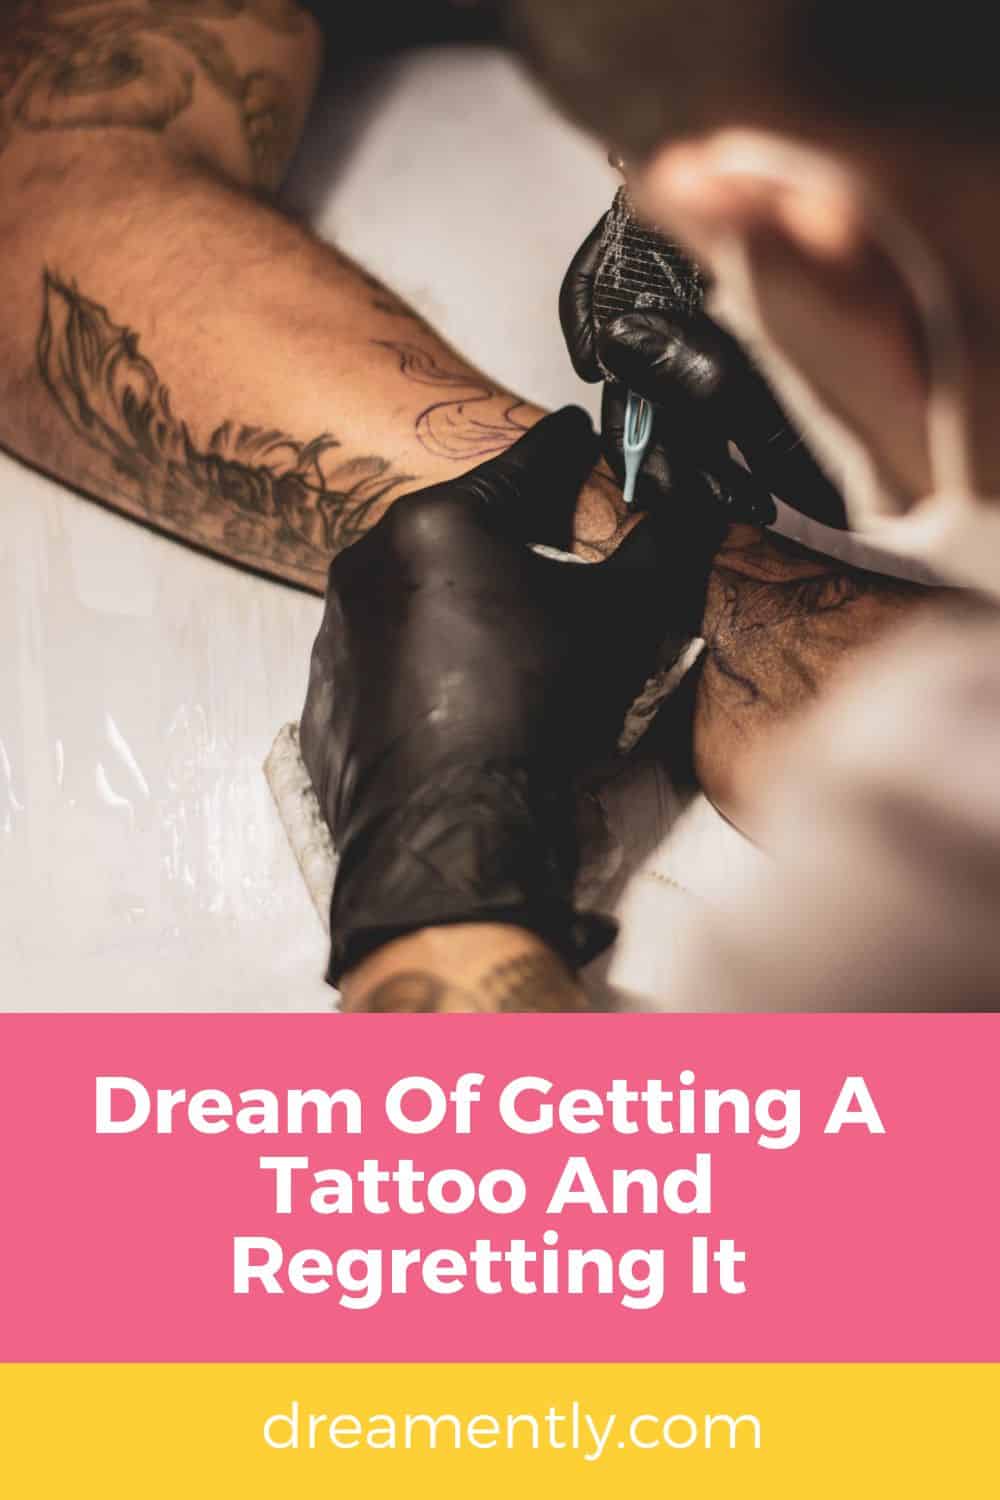 Dream Of Getting A Tattoo And Regretting It